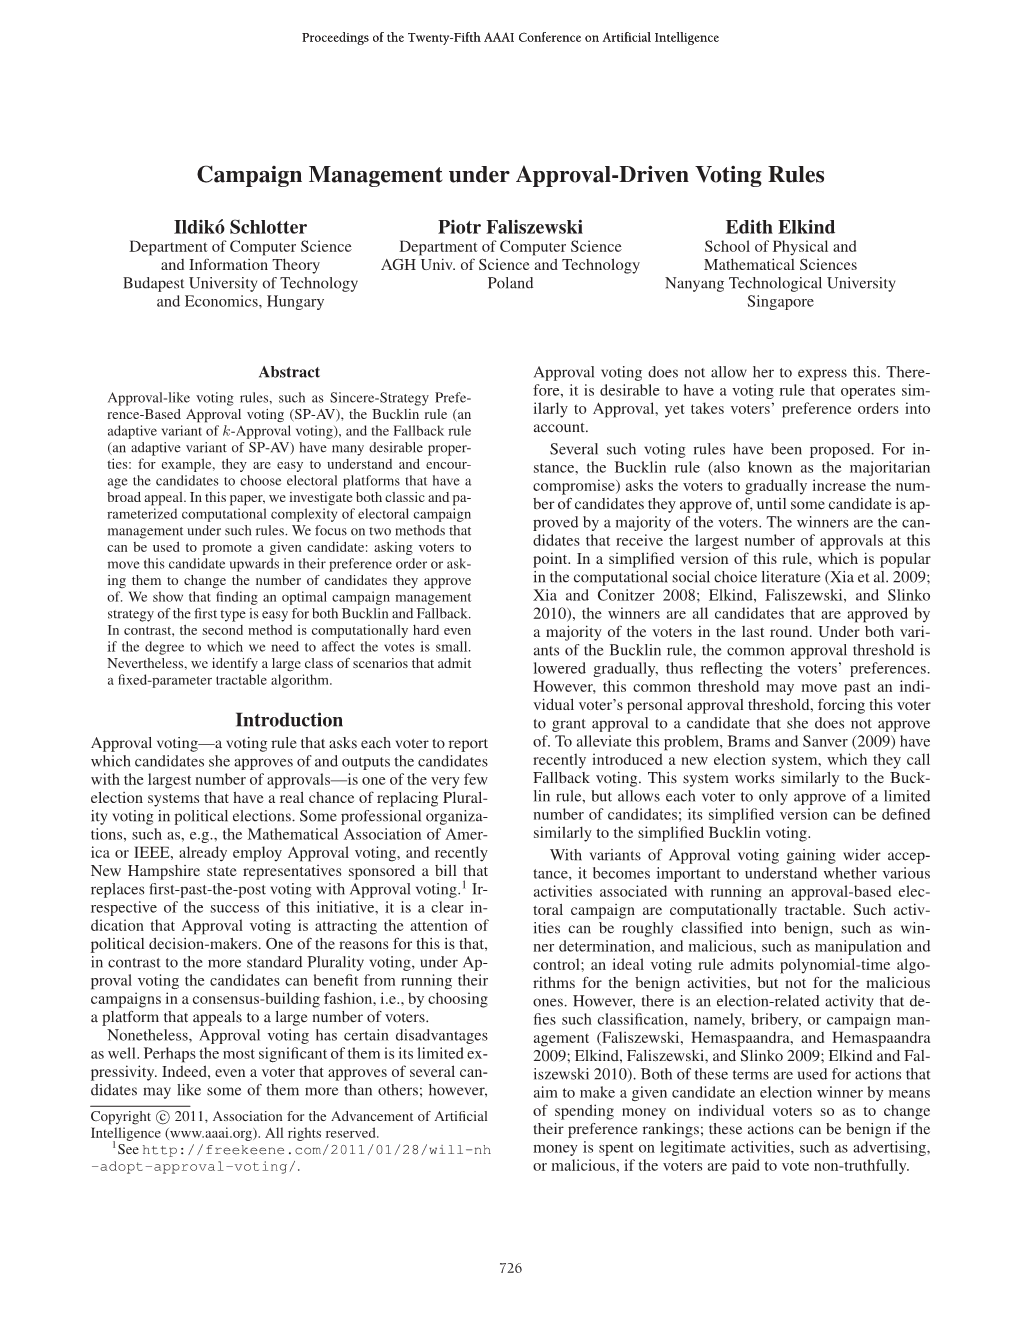 Campaign Management Under Approval-Driven Voting Rules